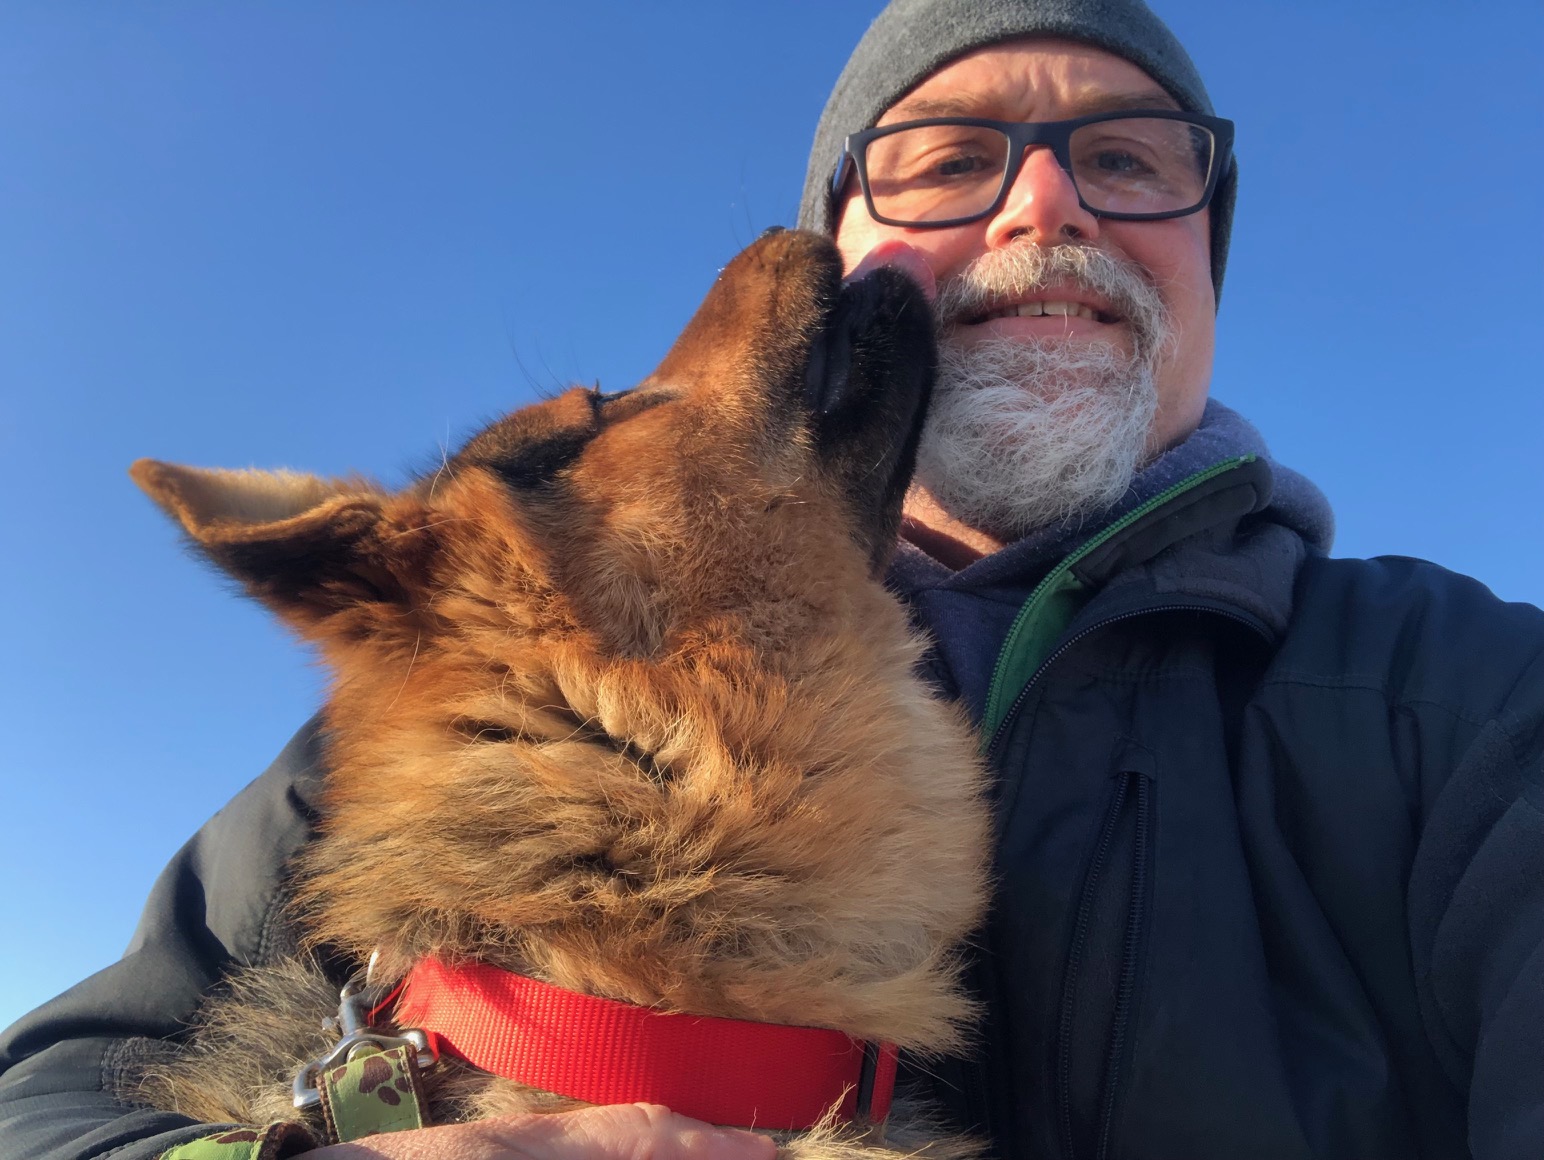 man with dog licking his face